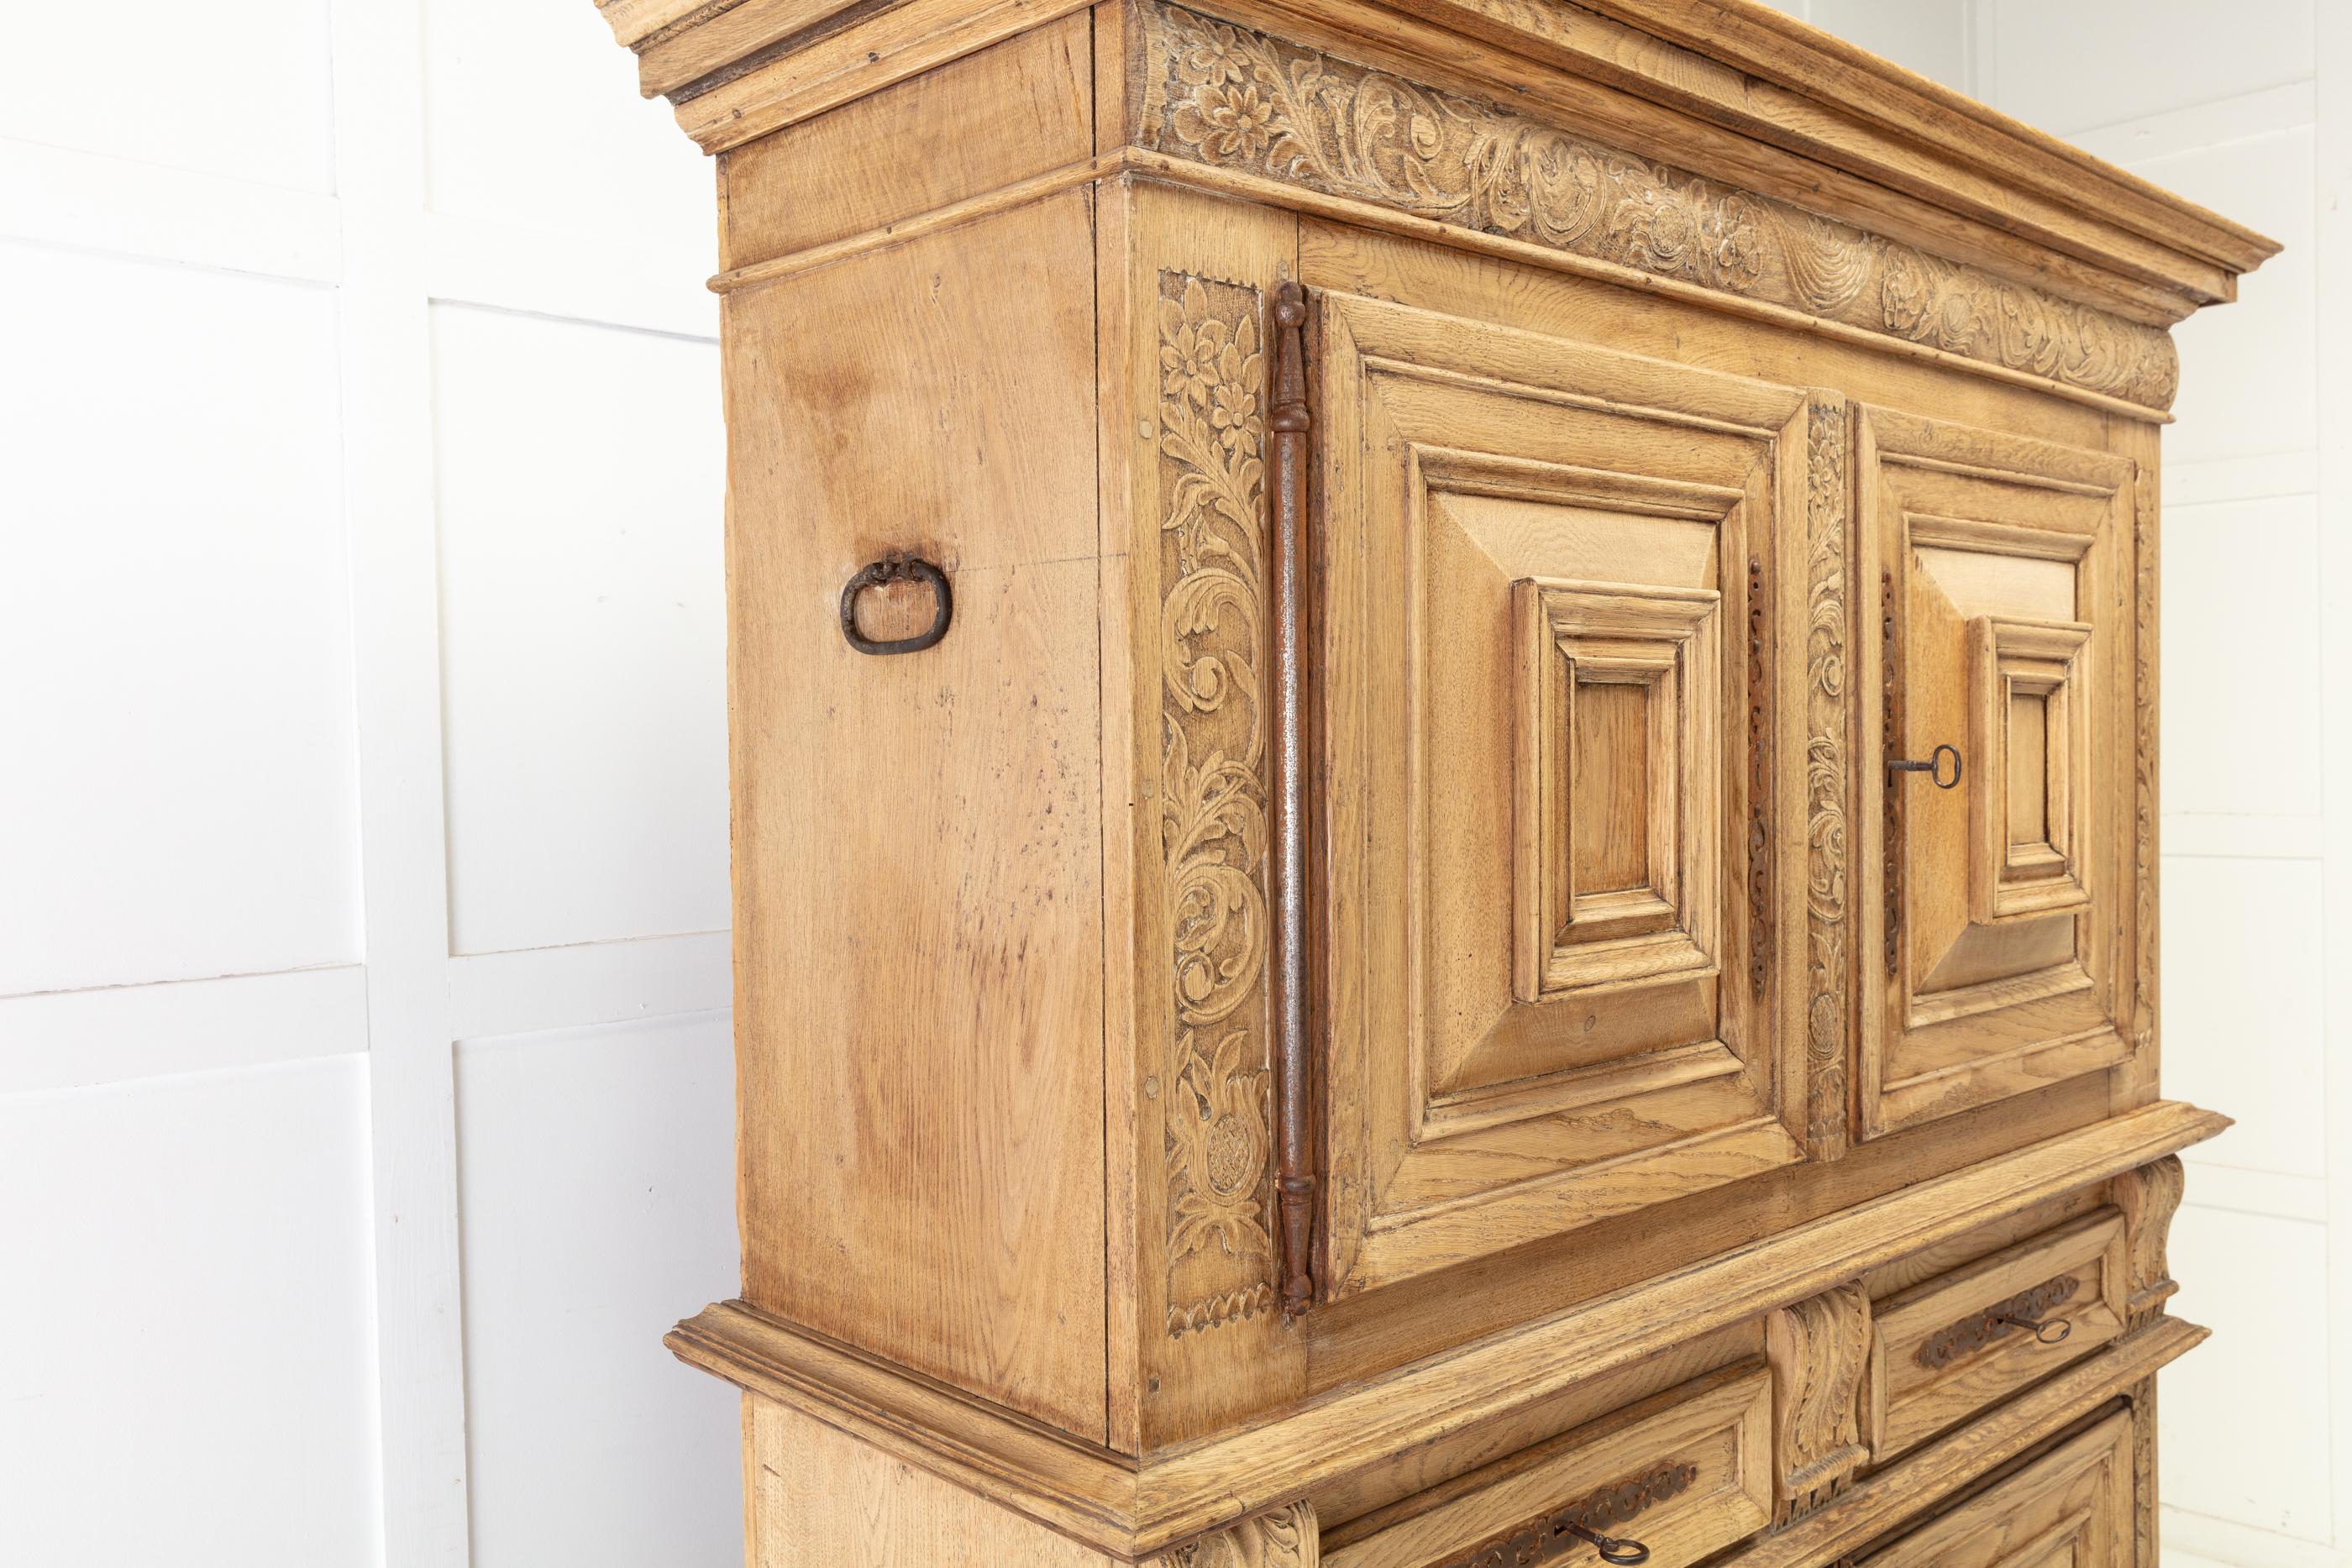 A small and nicely proportioned, 17th century bleached oak, Flemish cabinet. Having two panelled doors at the top and bottom, flanked by attractive carvings of foliage and acanthus leaves. Both sections having one shelf inside. The middle section